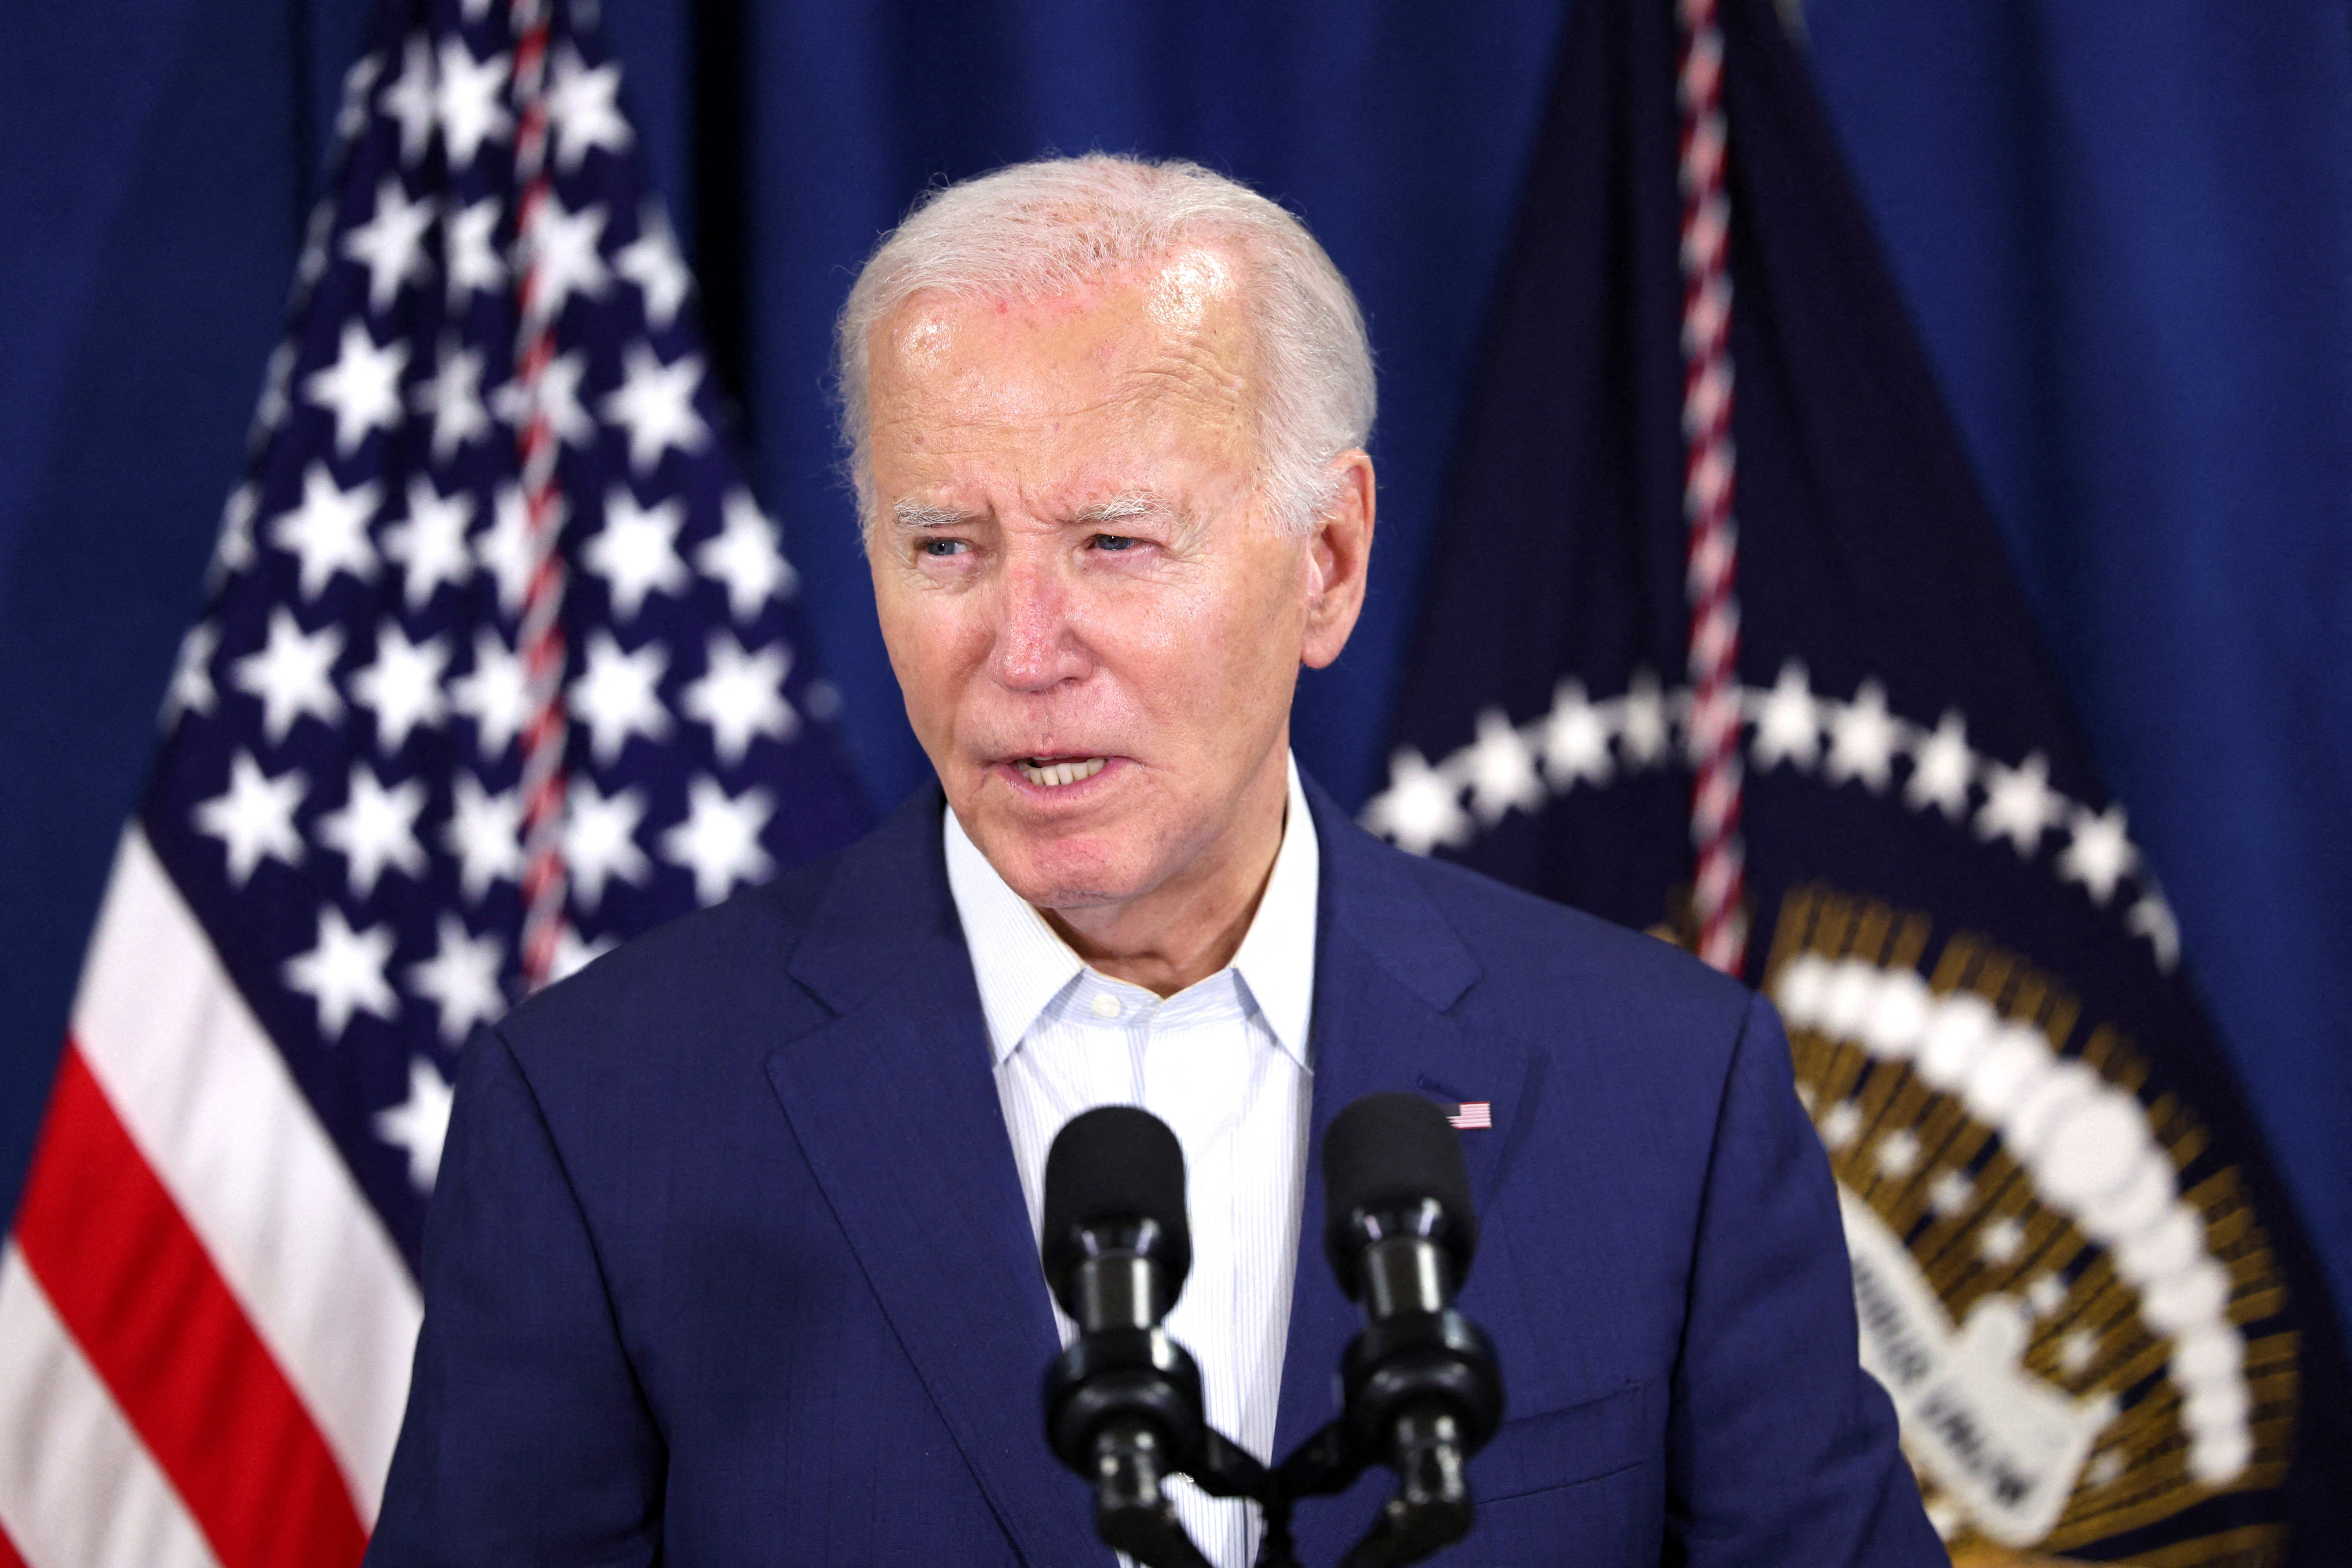 U.S. President Joe Biden delivers remarks following the incident that occurred at a campaign rally for former U.S. President Donald Trump, in Rehoboth Beach